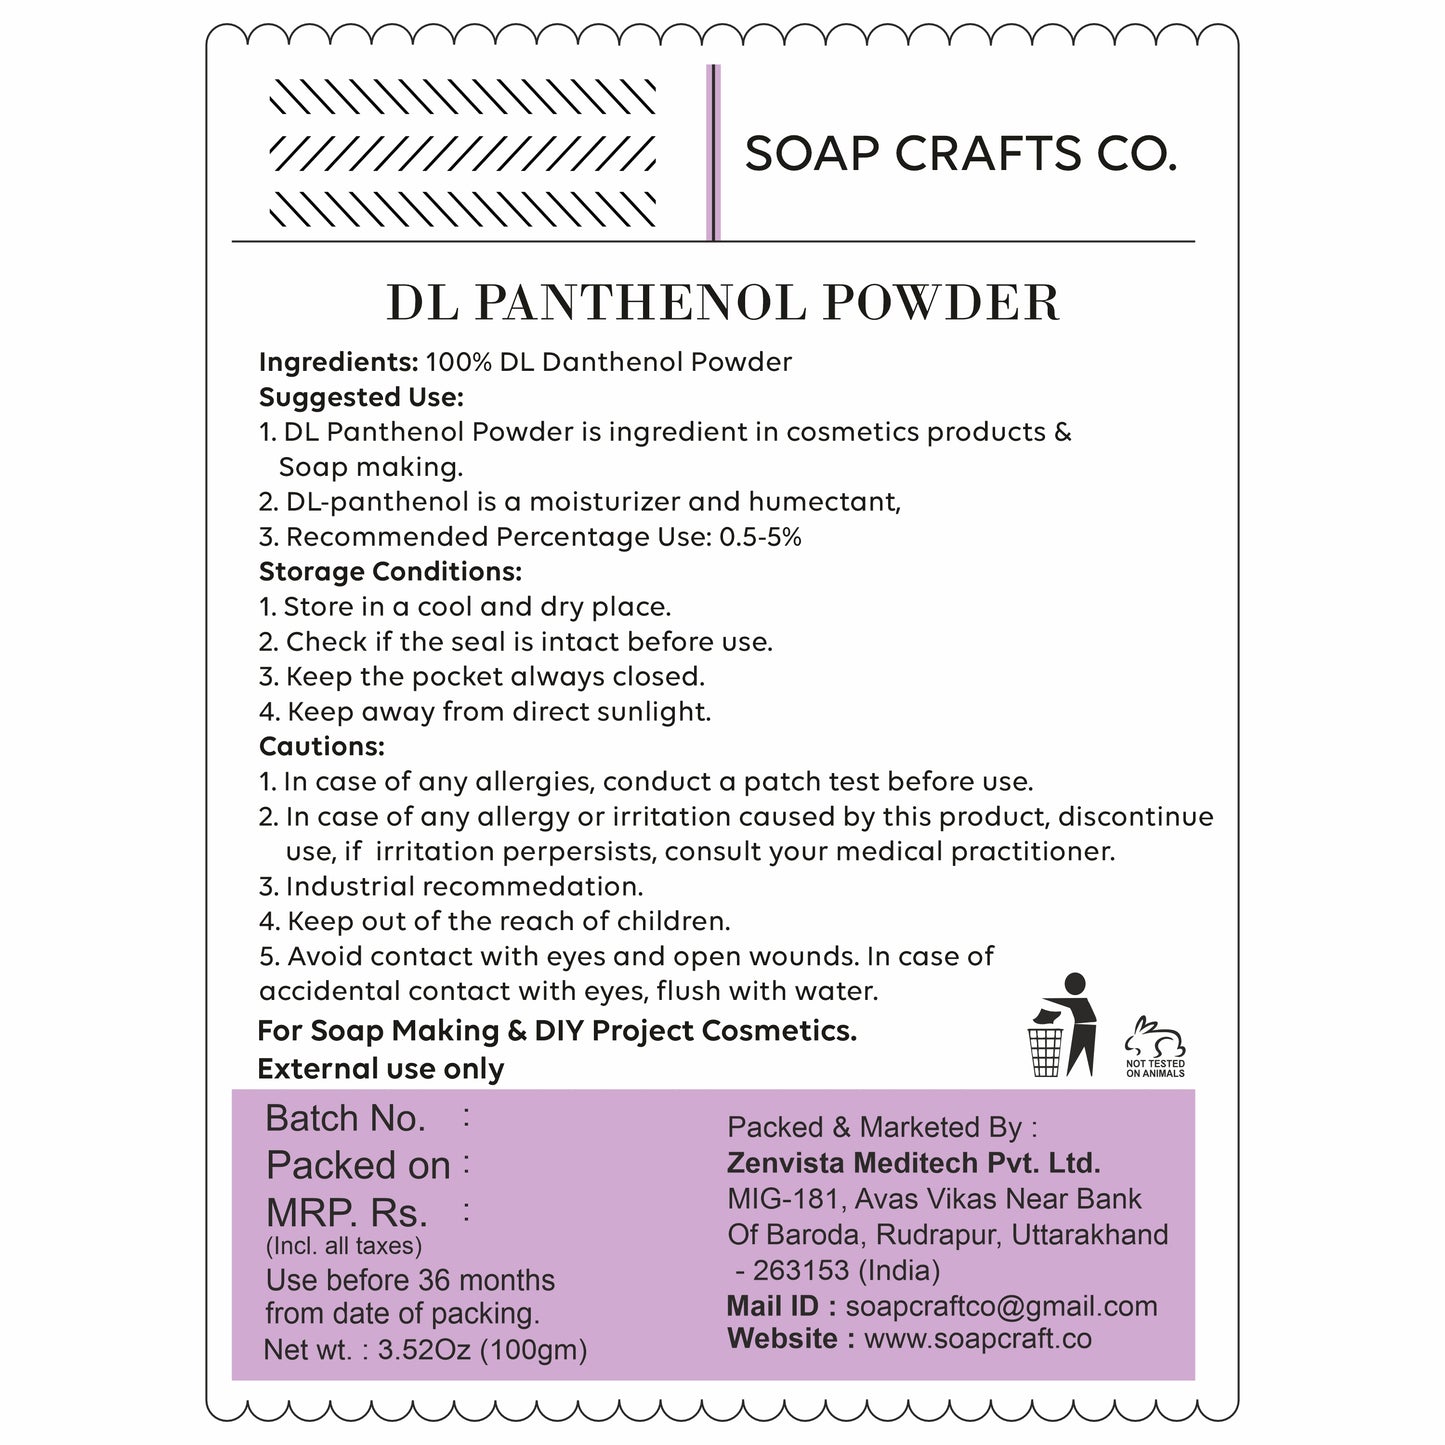 cosmeticmaking, saopmaking, cosmeticmakingingredients, soapmakingingredients,cosmeticingredients,naturalingredients,organicingredients,veganingredients, essentialoils,fragranceoils,carrieroils, carrieroils, butters, clays,botanicals,herbs,preservatives,emulsifiers,surfa ctants,thickeners, thickeners,exfoliants,DL panthenol